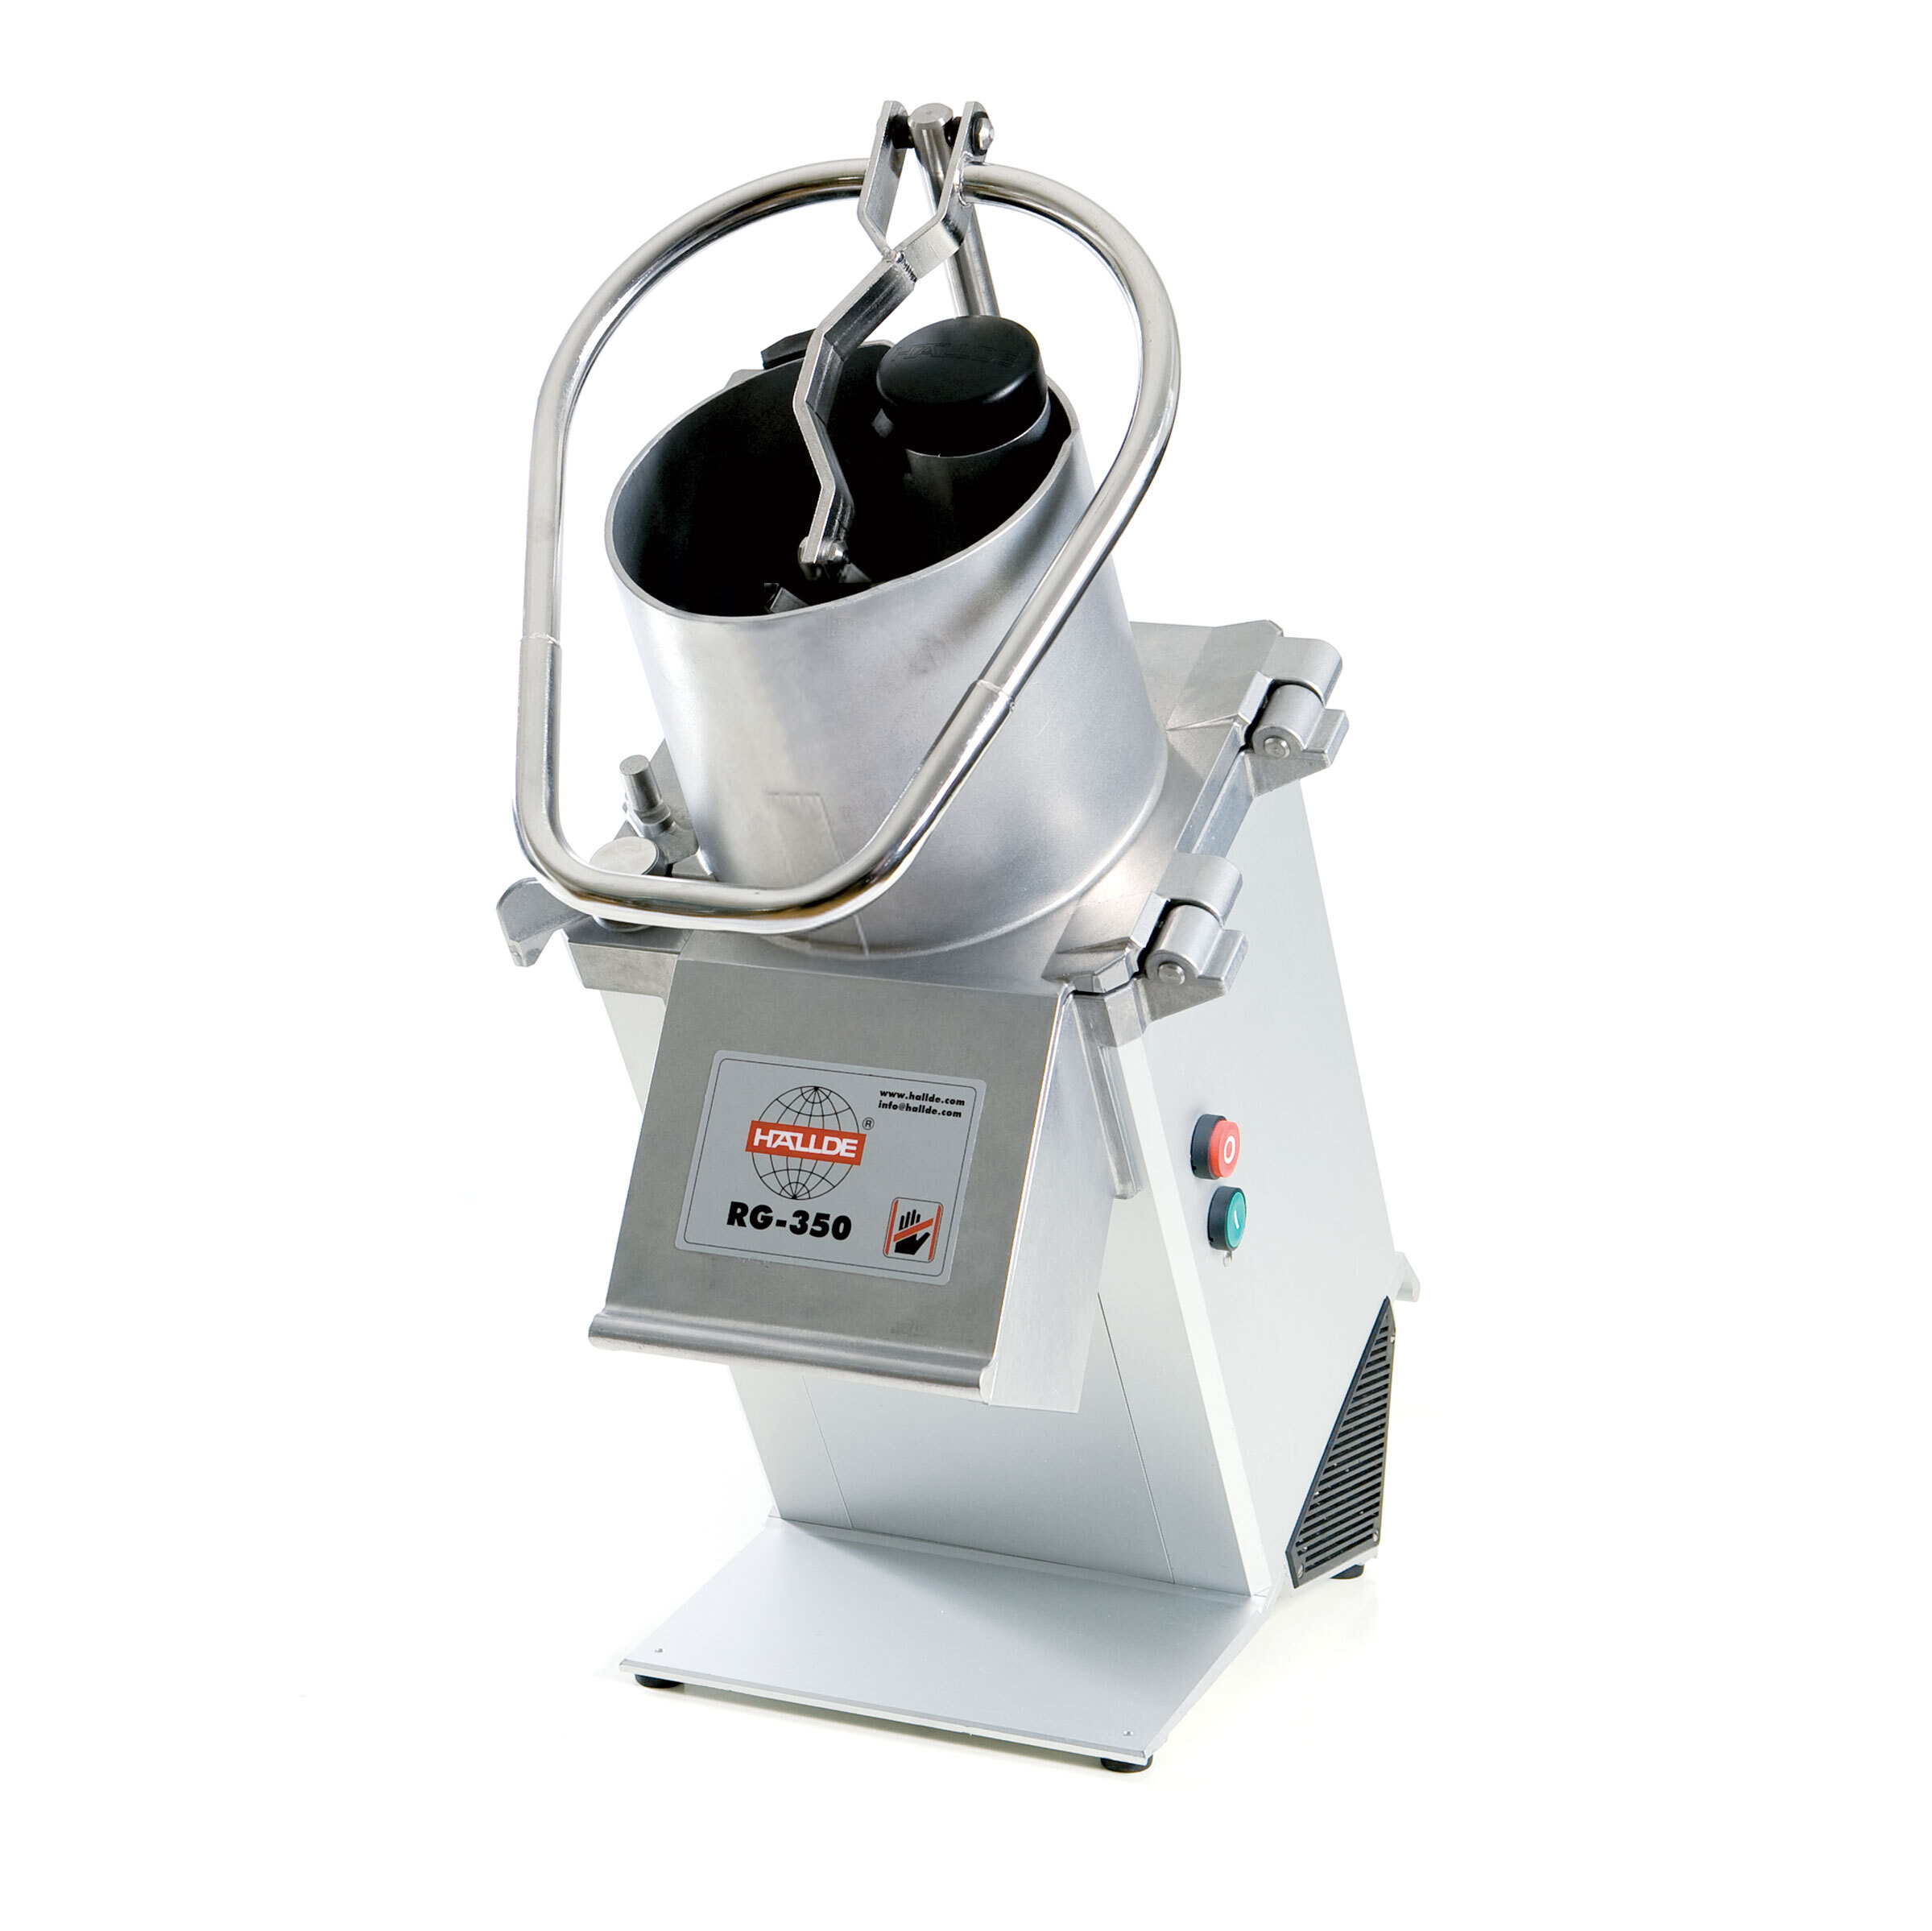 Hallde RG-350 Vegetable Preparation Machine - no cutting discs included